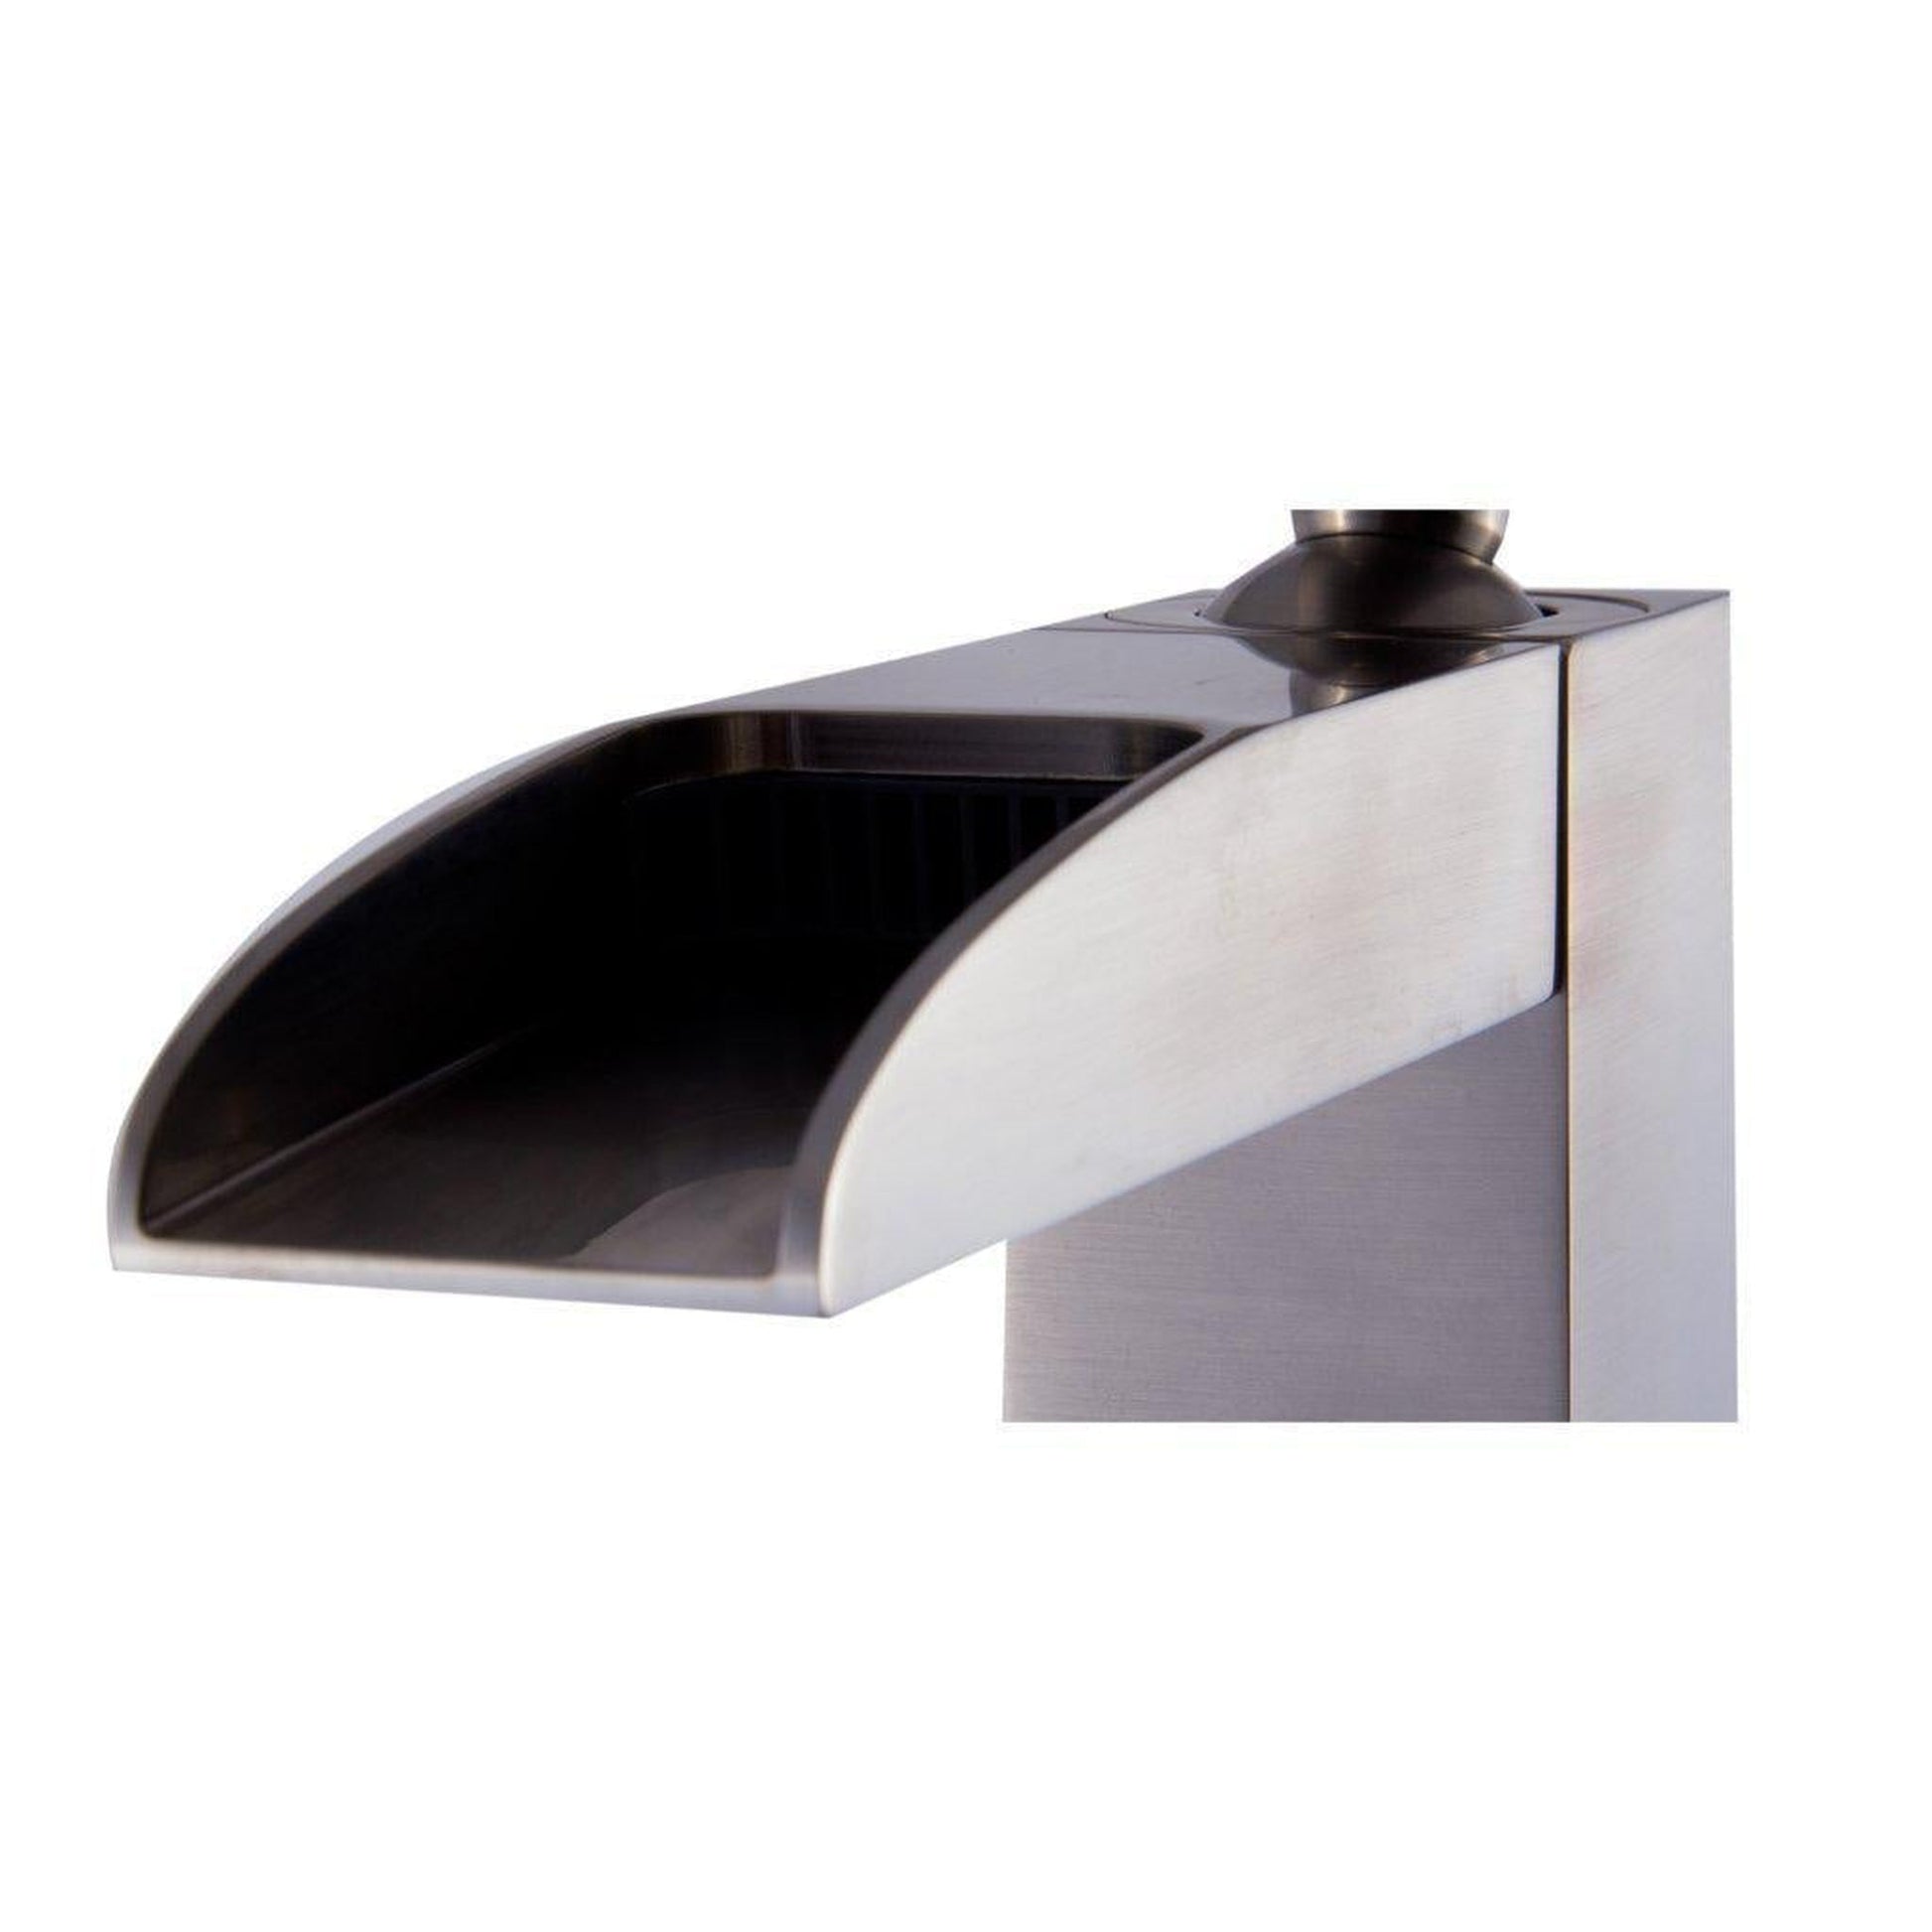 ALFI Brand AB1597-BN Brushed Nickel Vessel Waterfall Spout Brass Bathroom Sink Faucet With Single Lever